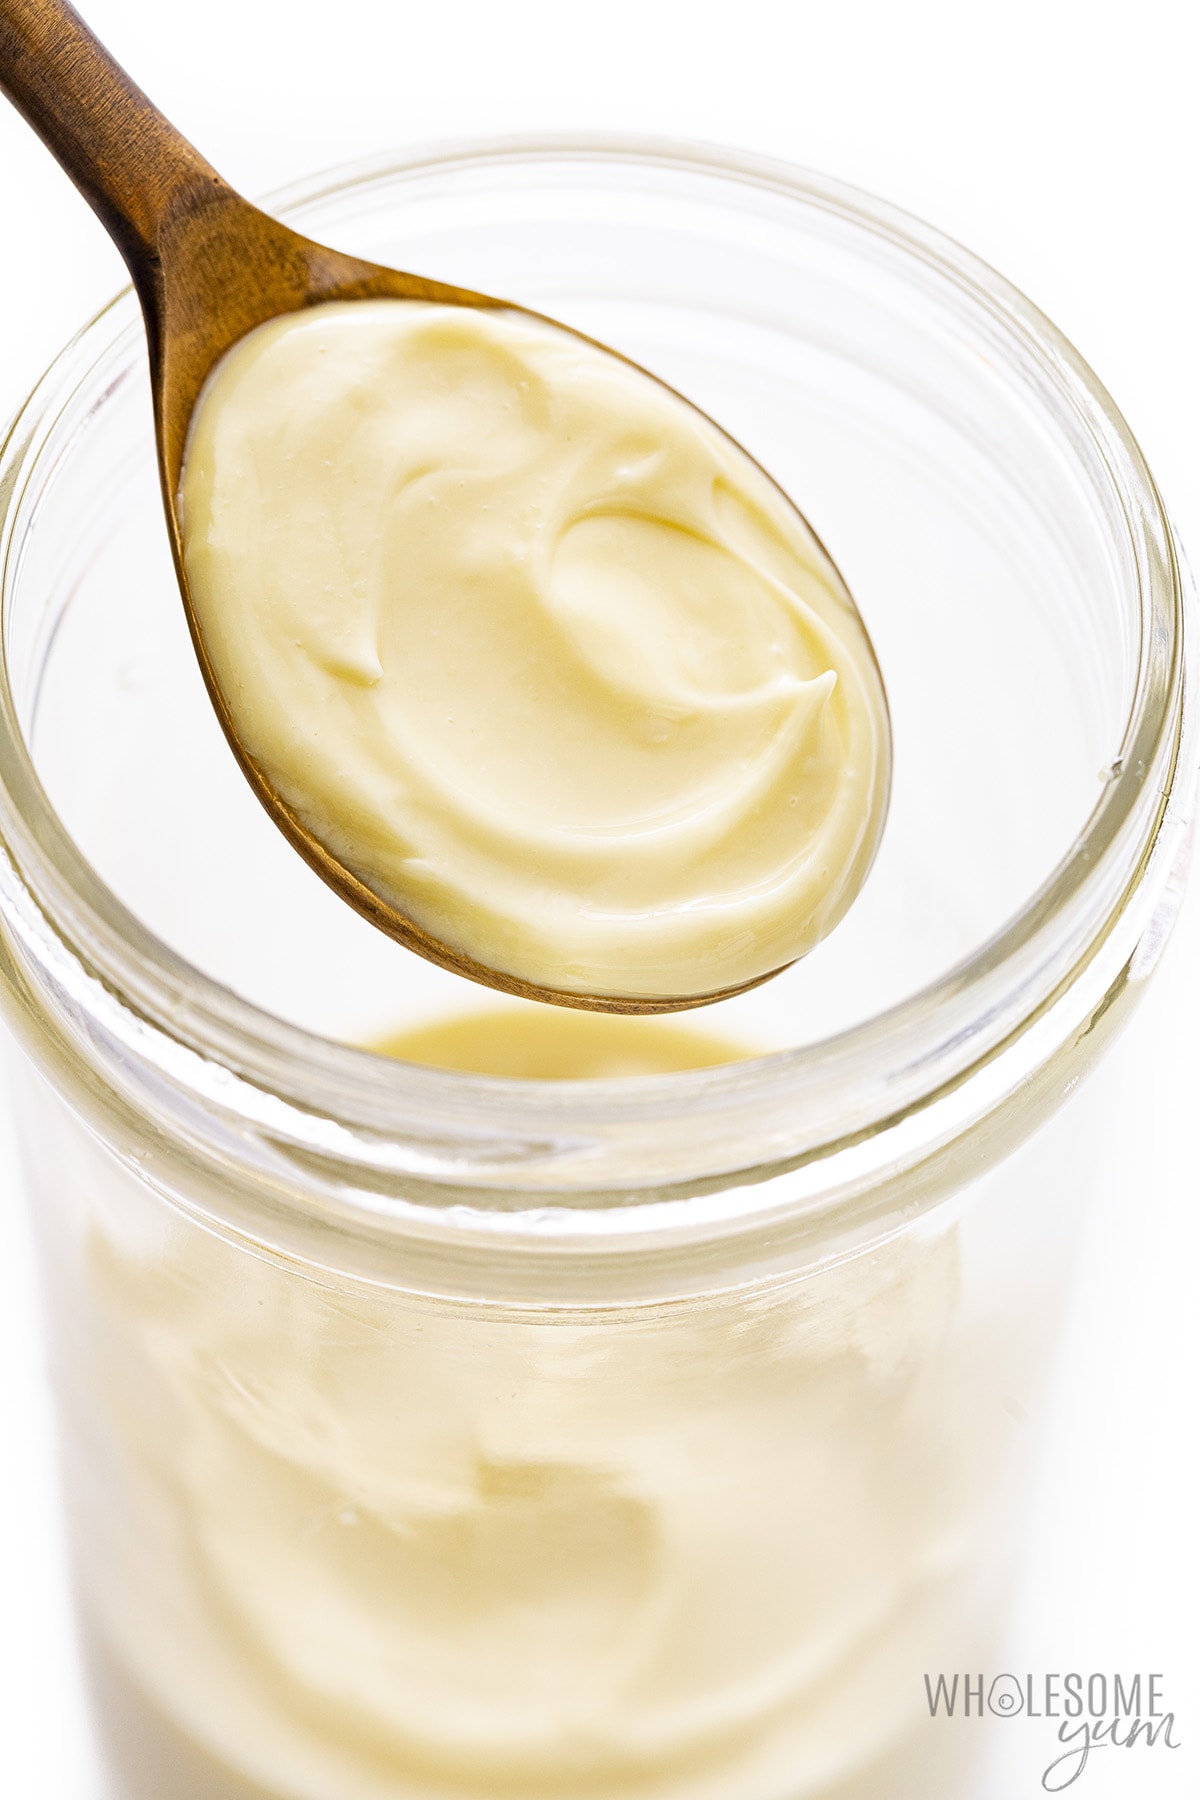 Homemade mayo in a jar with a spoon.